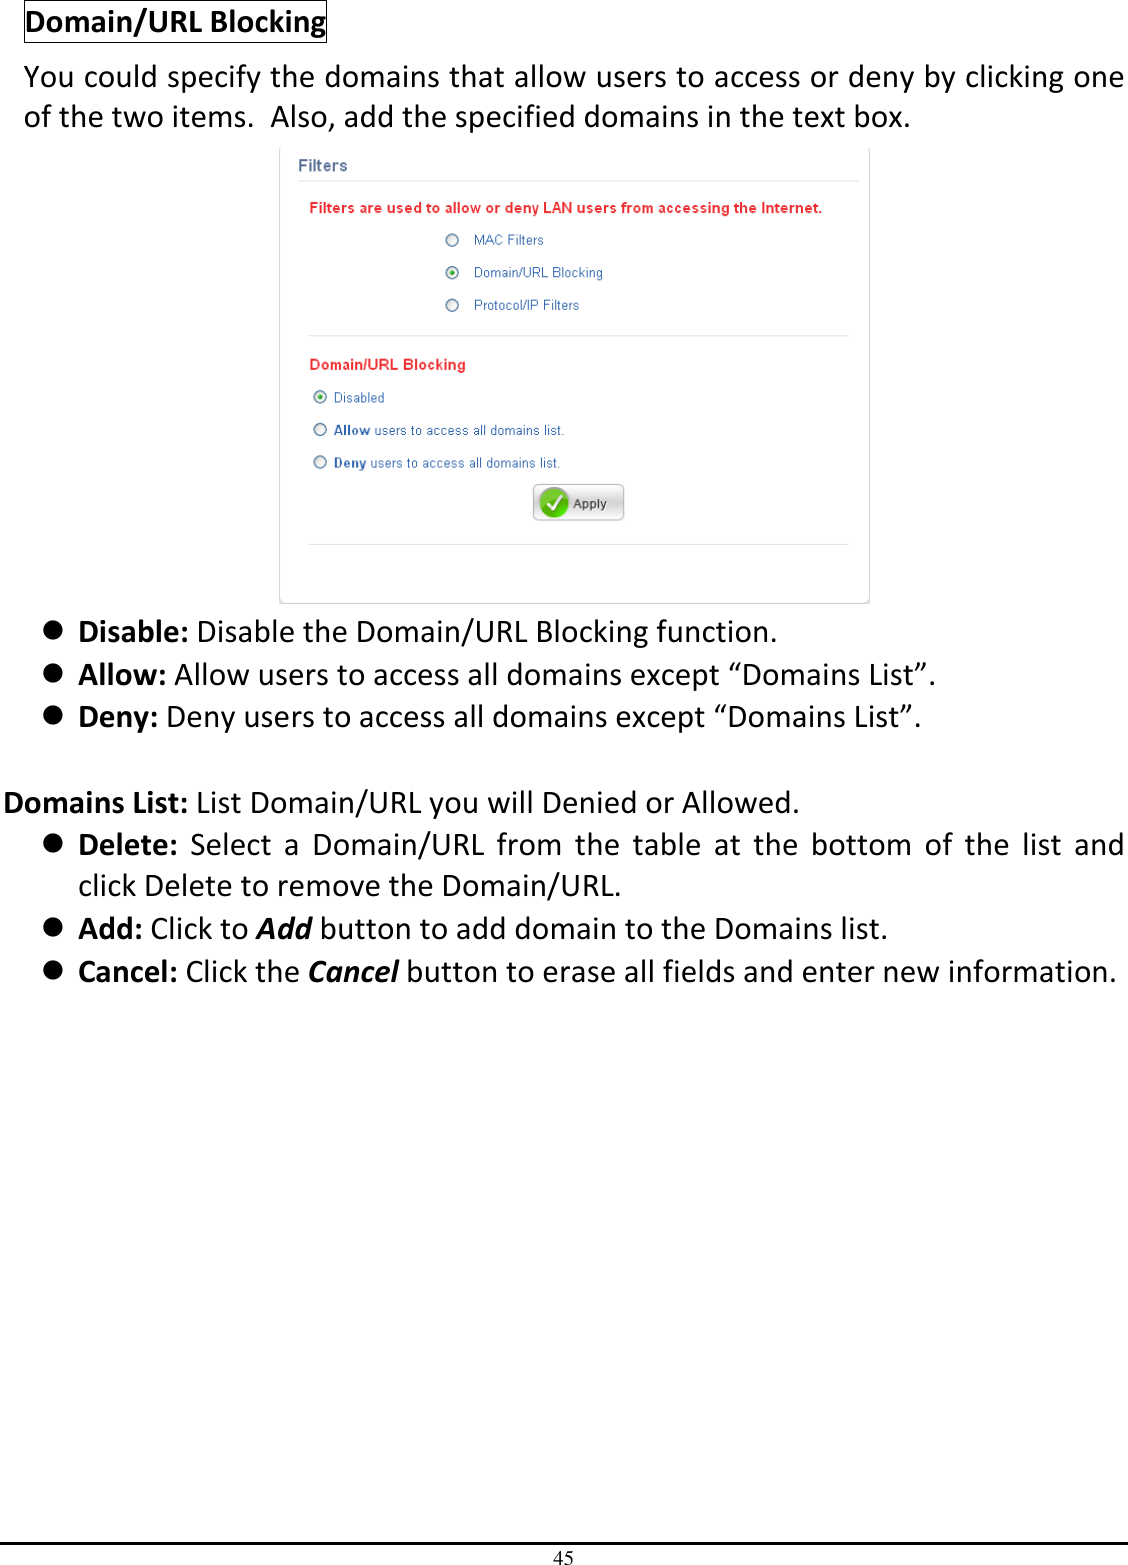 45 Domain/URL Blocking You could specify the domains that allow users to access or deny by clicking one of the two items.  Also, add the specified domains in the text box.   Disable: Disable the Domain/URL Blocking function.  Allow: Allow users to access all domains except “Domains List”.  Deny: Deny users to access all domains except “Domains List”.  Domains List: List Domain/URL you will Denied or Allowed.  Delete:  Select  a  Domain/URL  from  the  table  at  the  bottom  of  the  list  and click Delete to remove the Domain/URL.  Add: Click to Add button to add domain to the Domains list.  Cancel: Click the Cancel button to erase all fields and enter new information. 